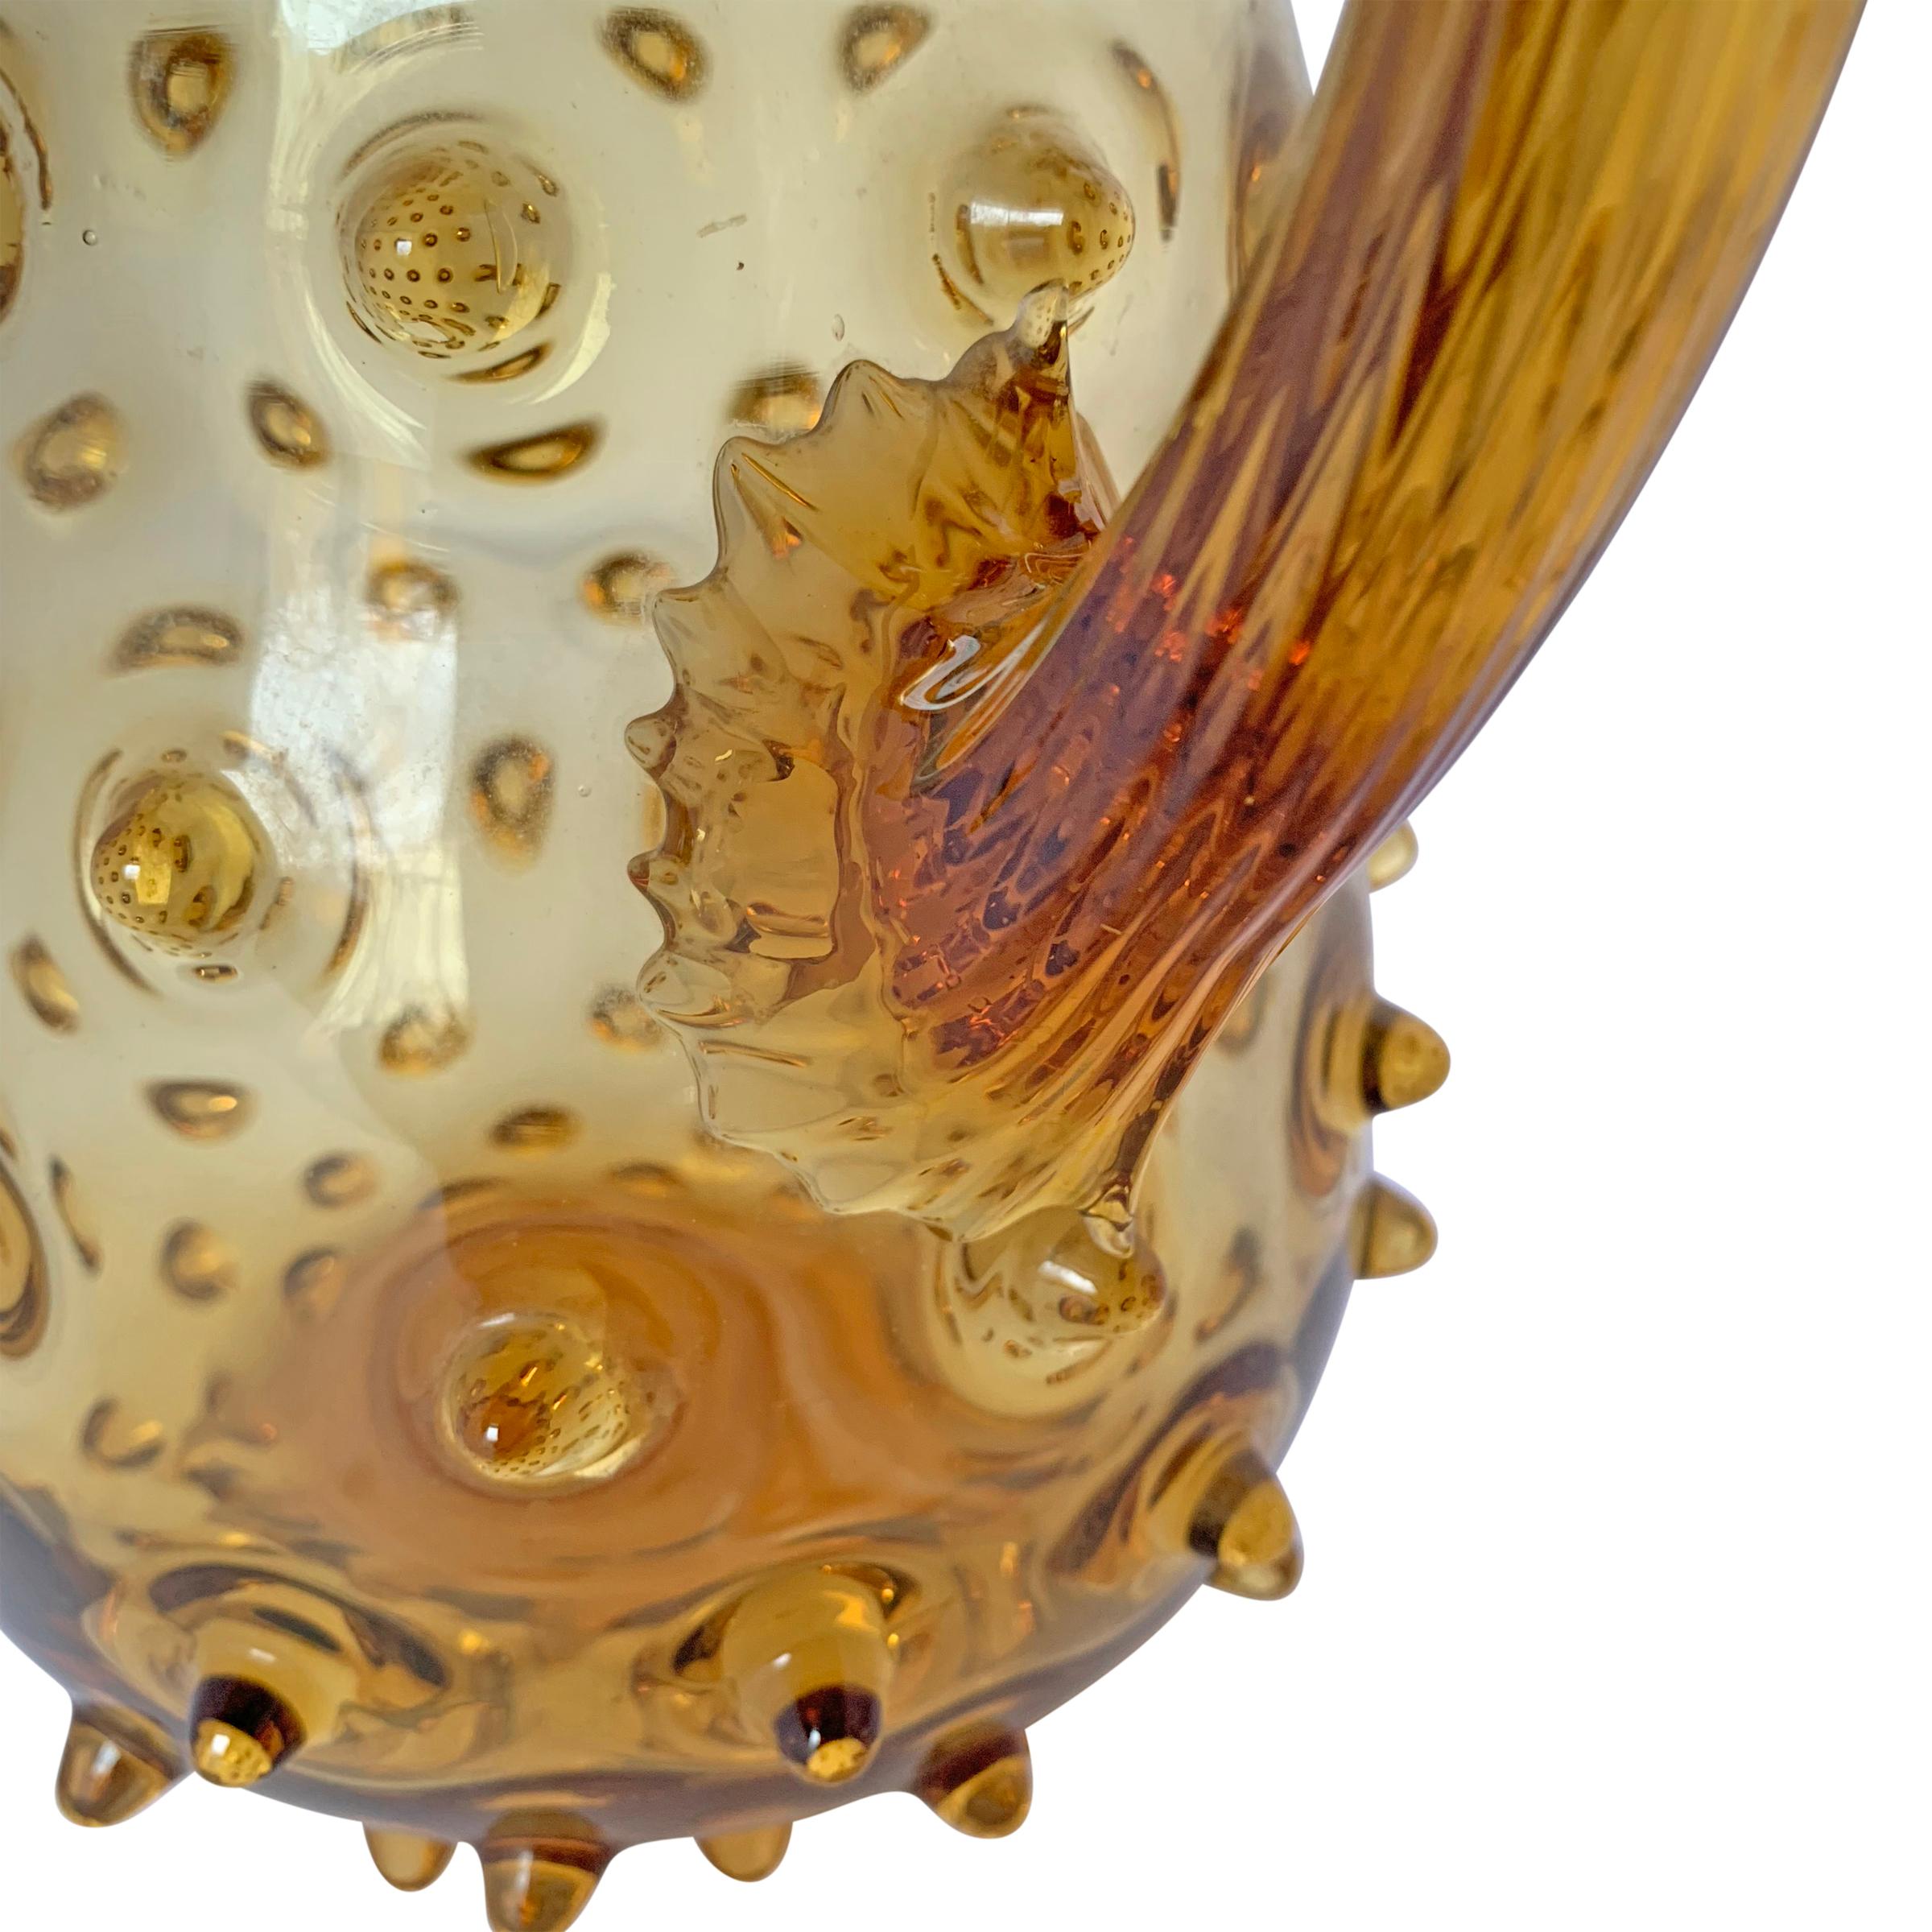 Blown Glass Mid-20th Century American Amber Glass Hobnail Pitcher